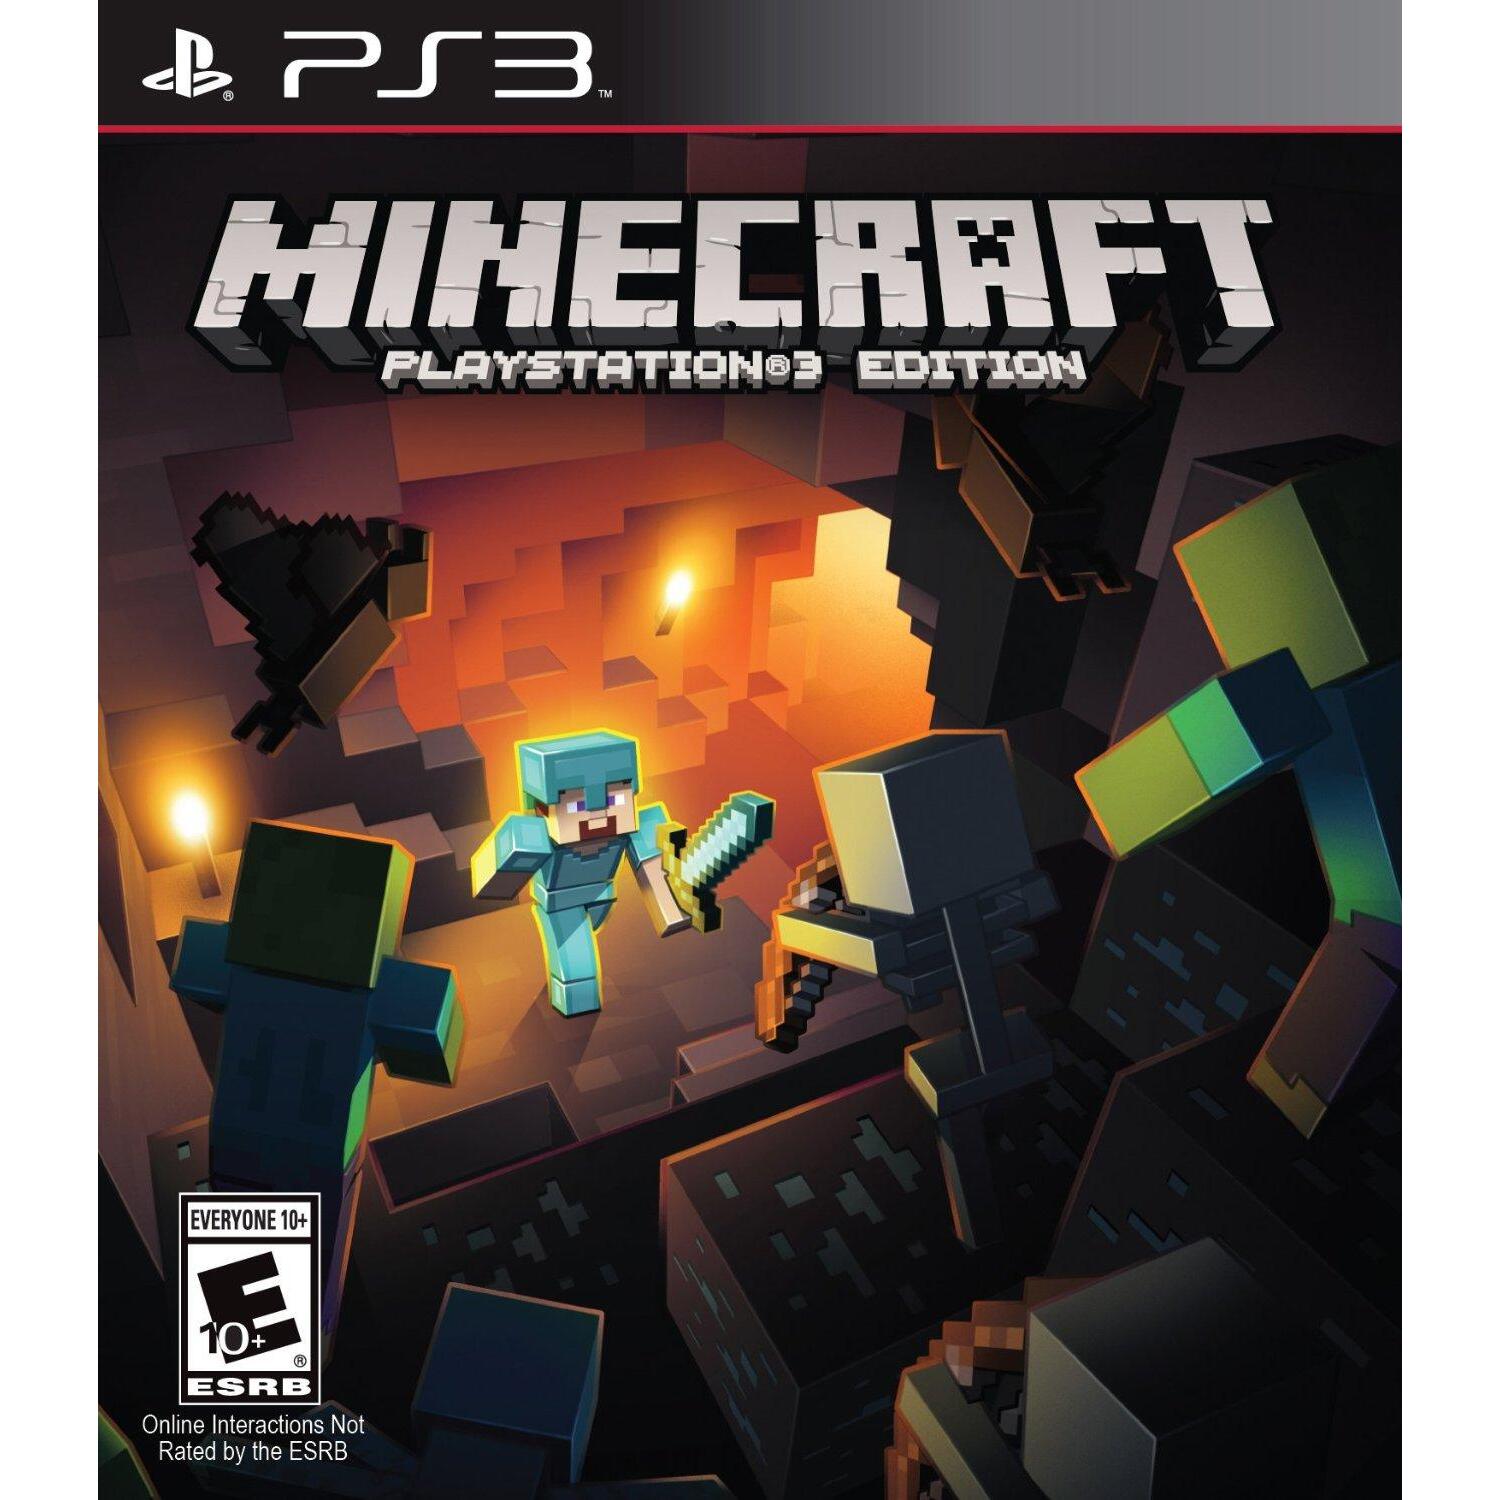 Fonkeling Soms soms Netto Minecraft - PlayStation 3 Edition (PS3) | €17.99 | Goedkoop!